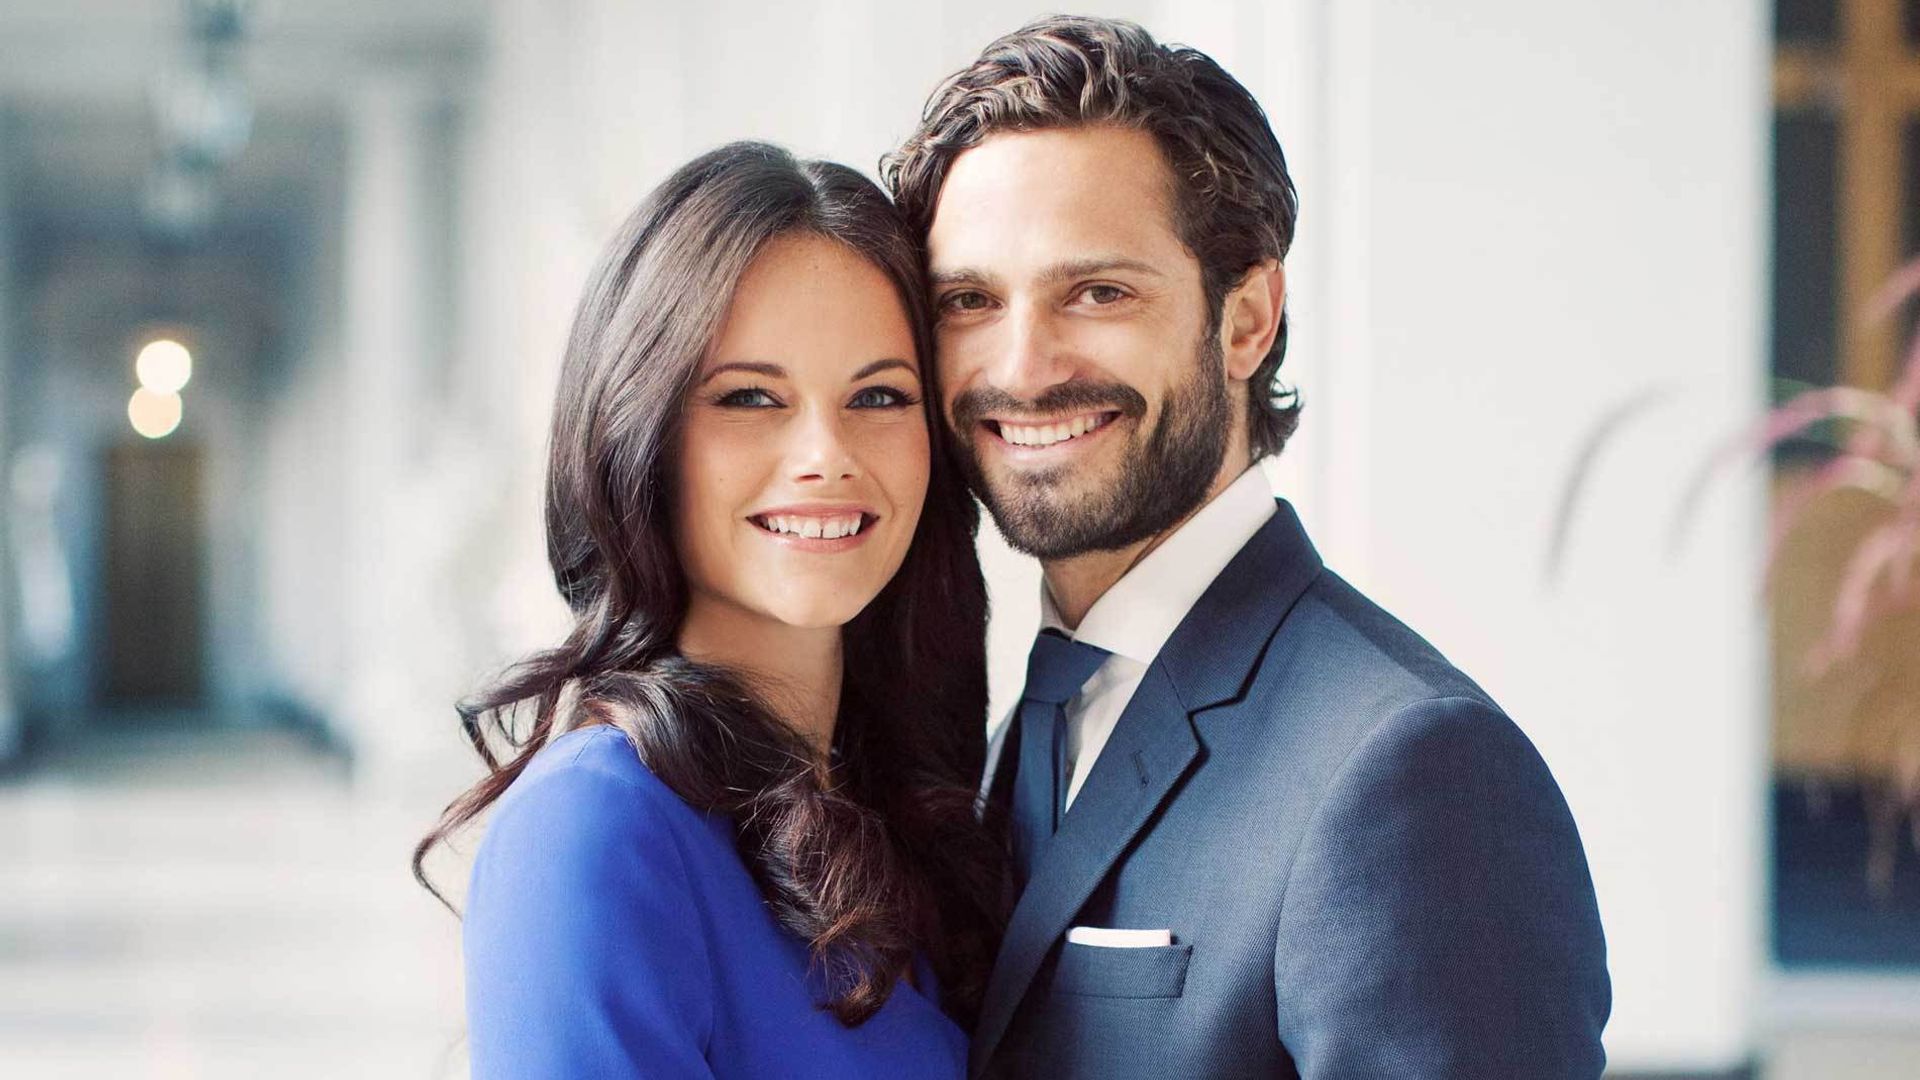 Princess Sofia and Prince Carl Philip of Sweden welcome a baby boy